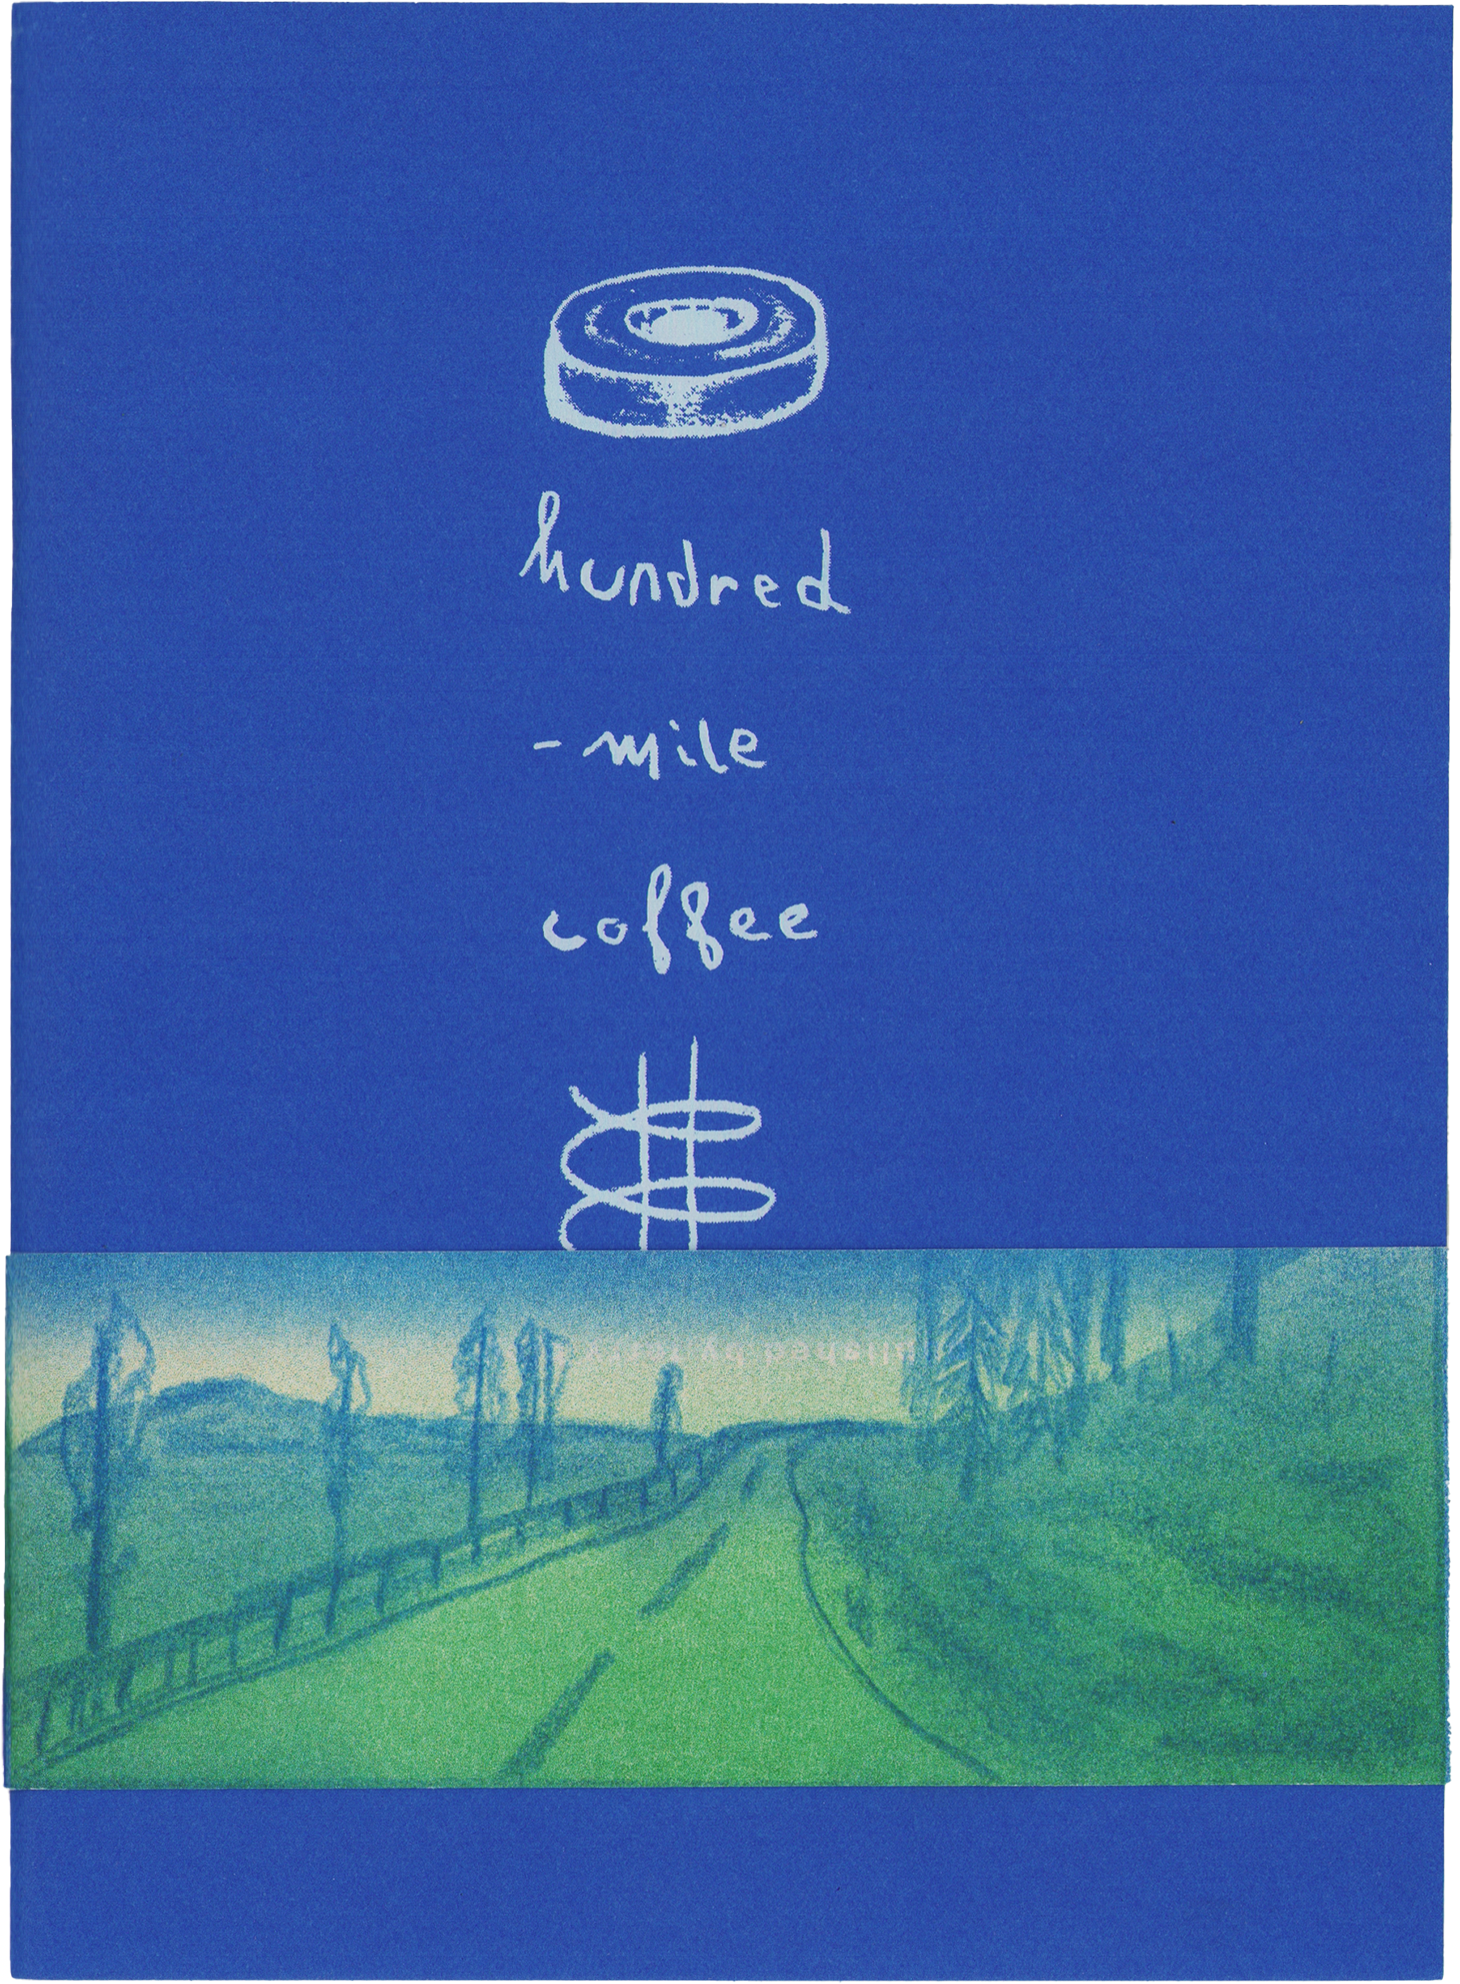 Hundred-mile Coffee